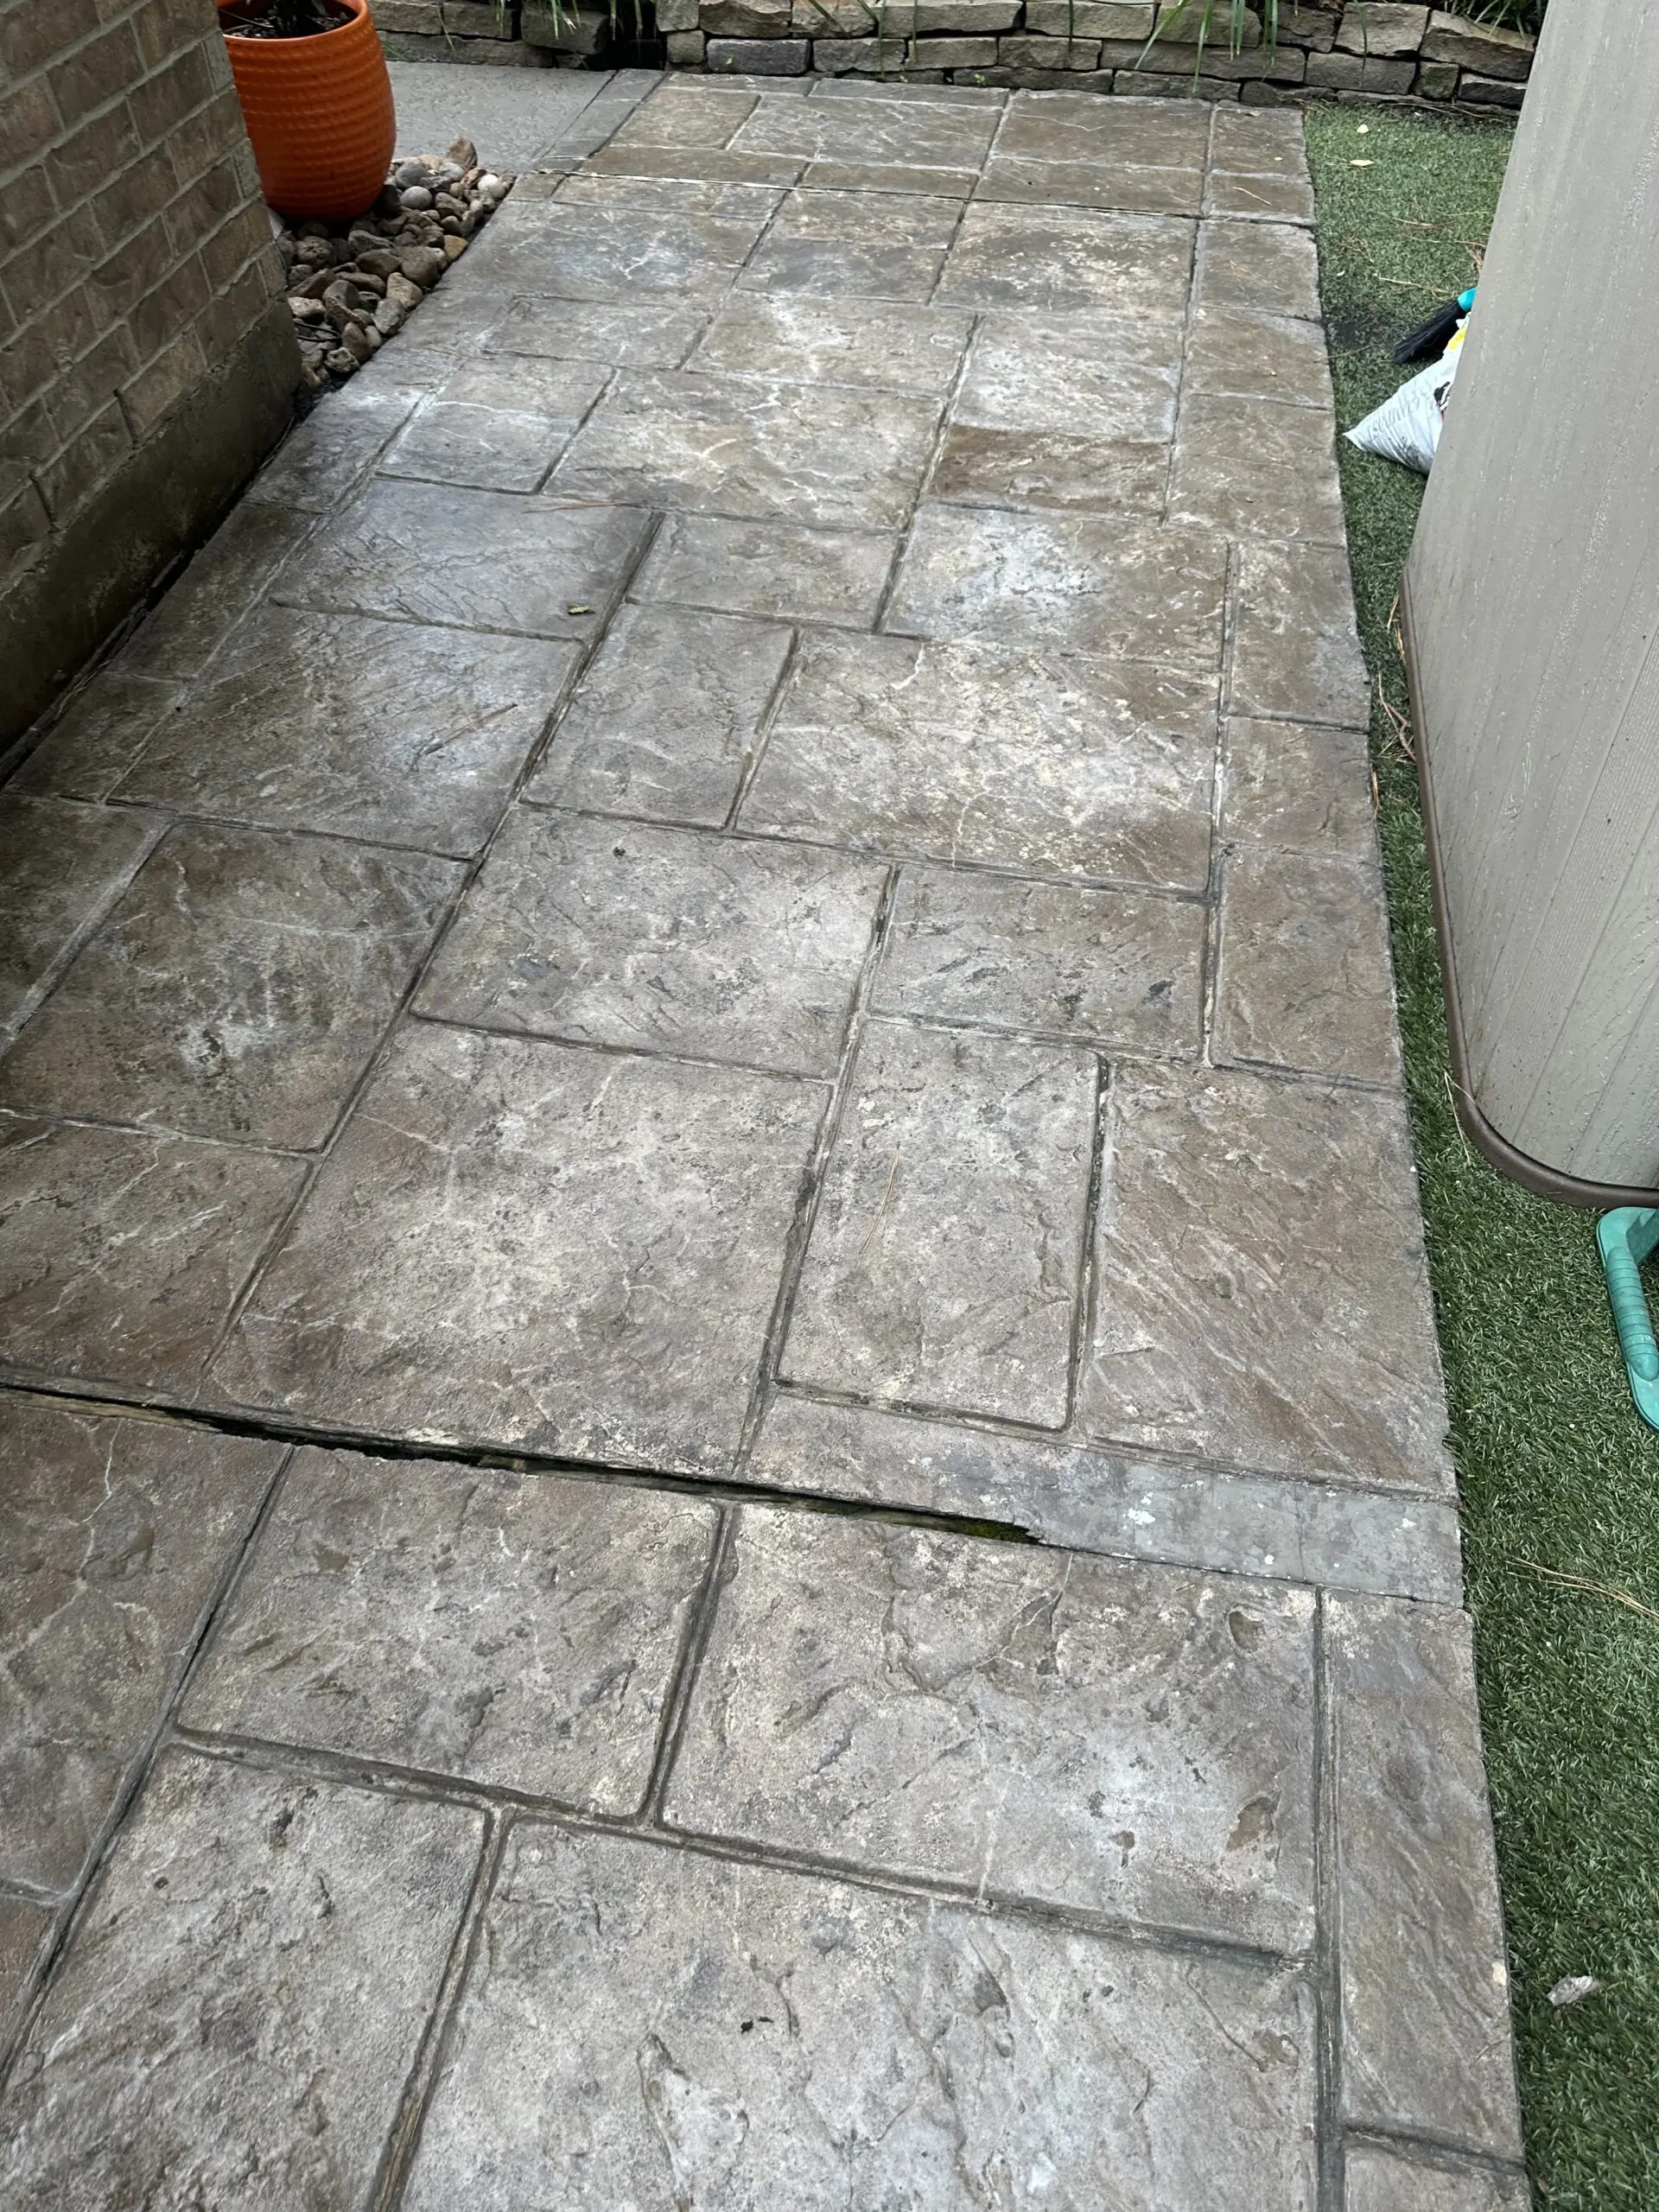 Discolored and faded stamped concrete, showing signs of wear and age.